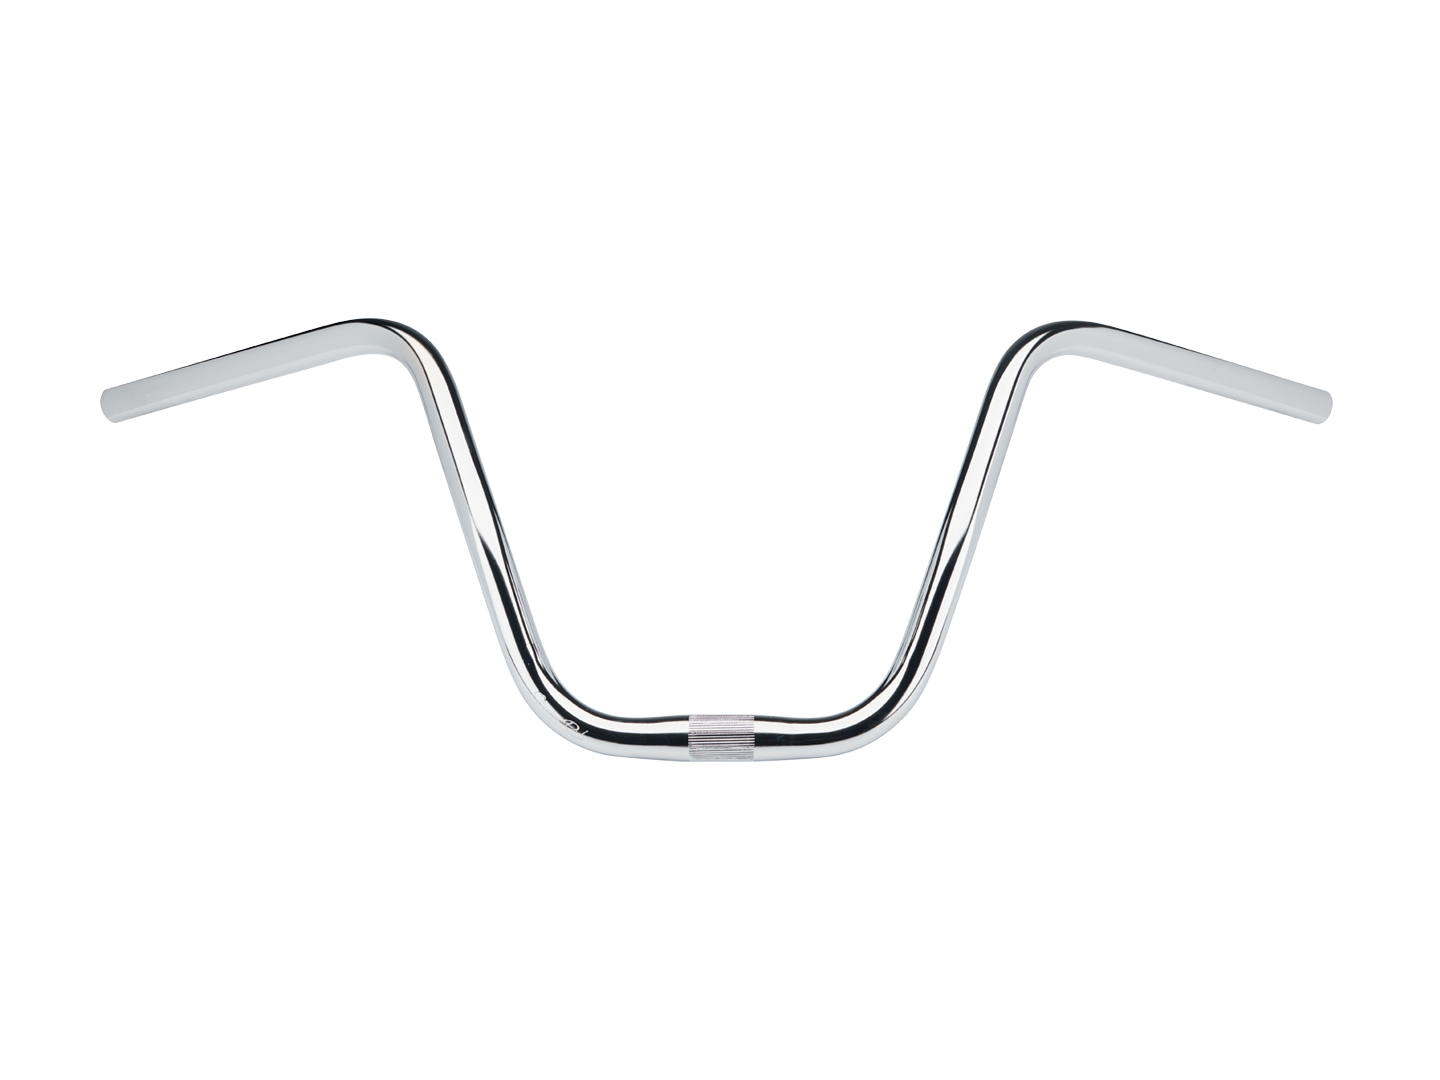 ape hanger bars for bicycle